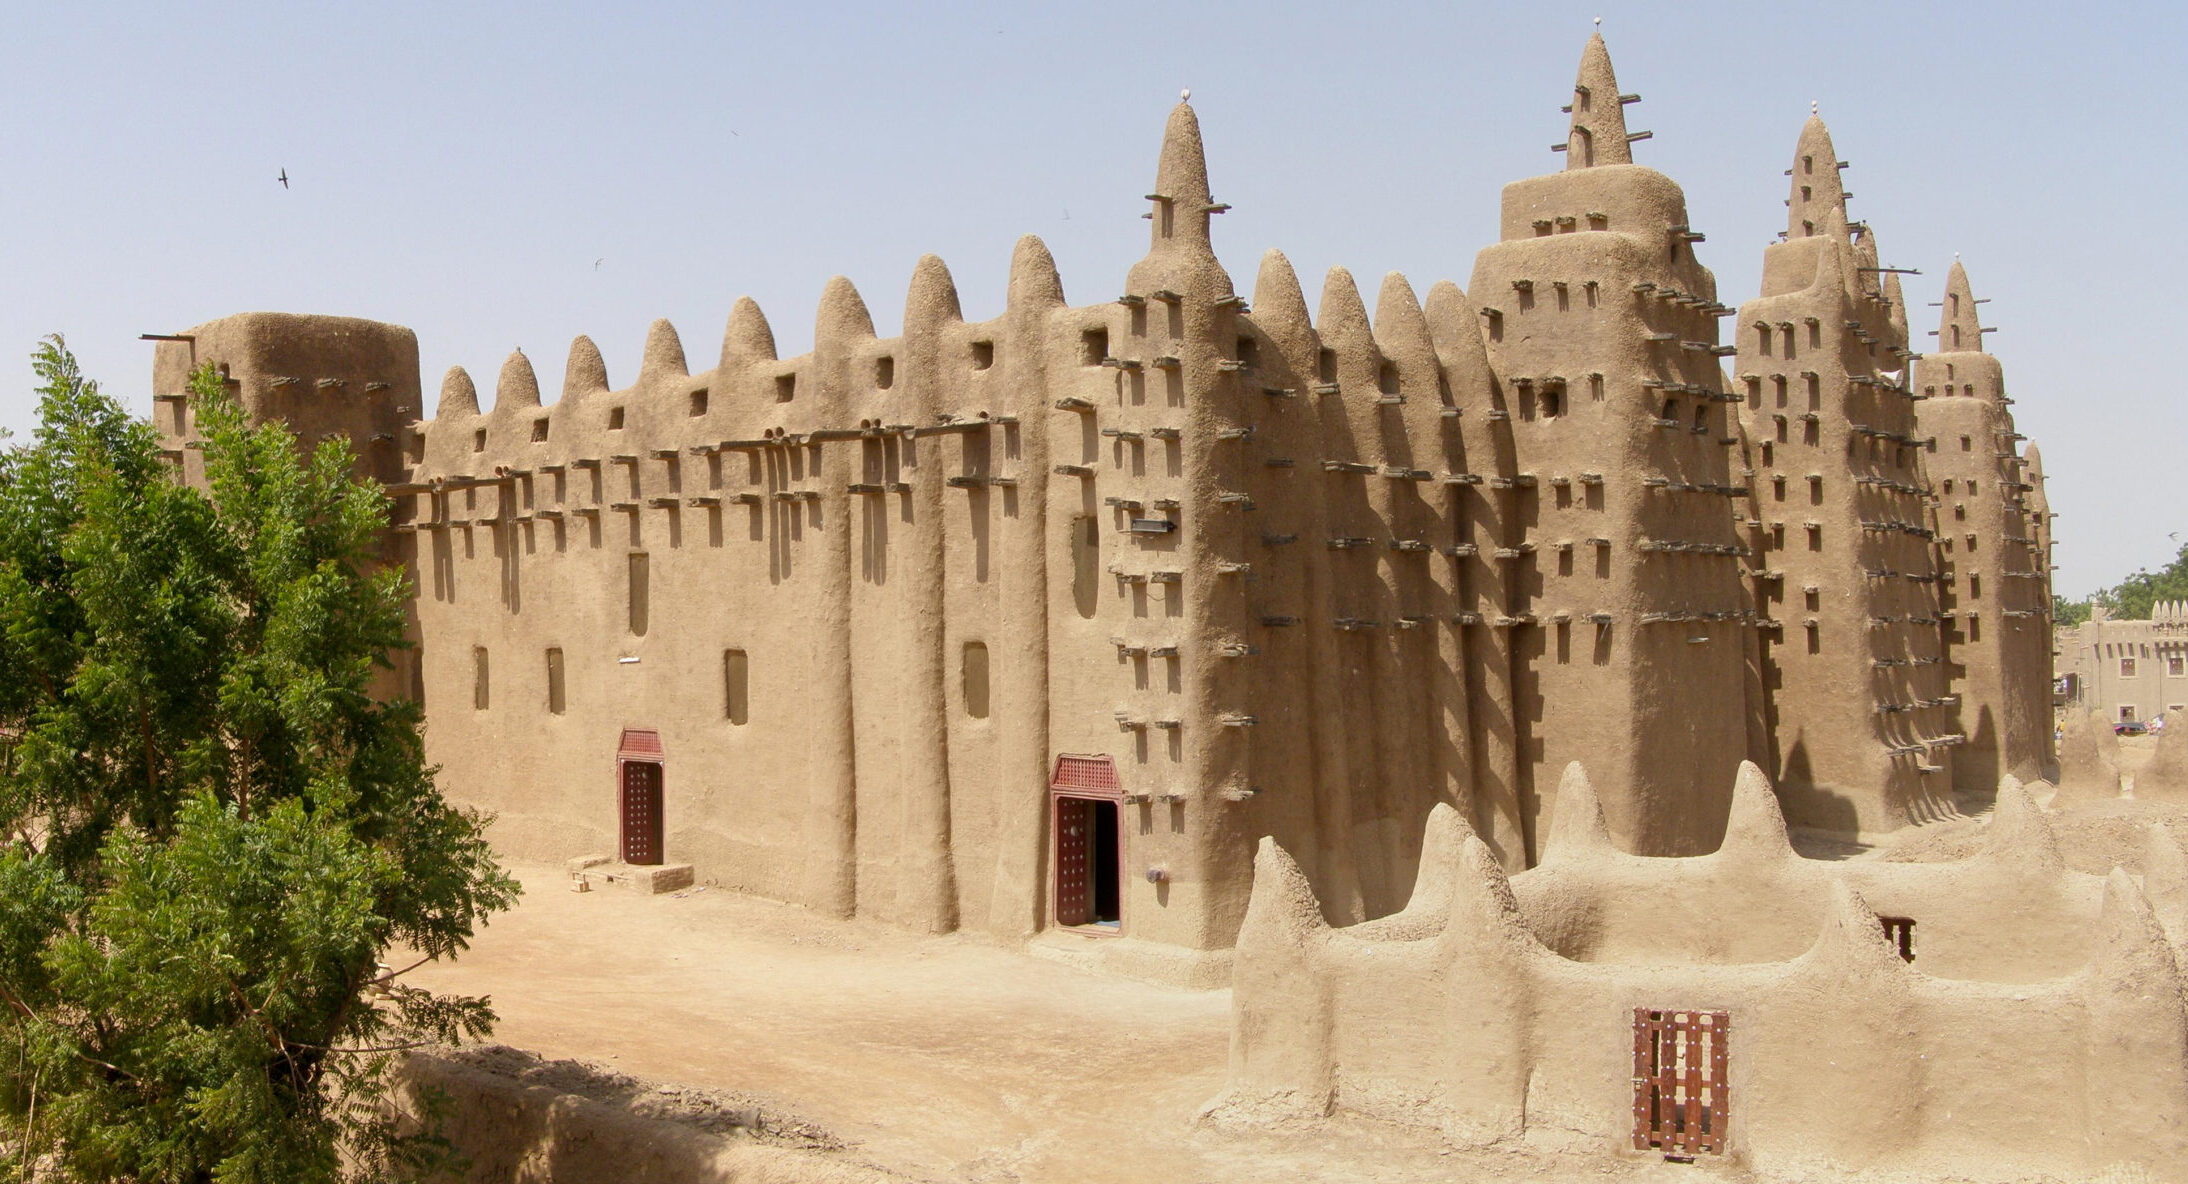 <p><span>The Great Mosque of Djenne, Mali</span></p>